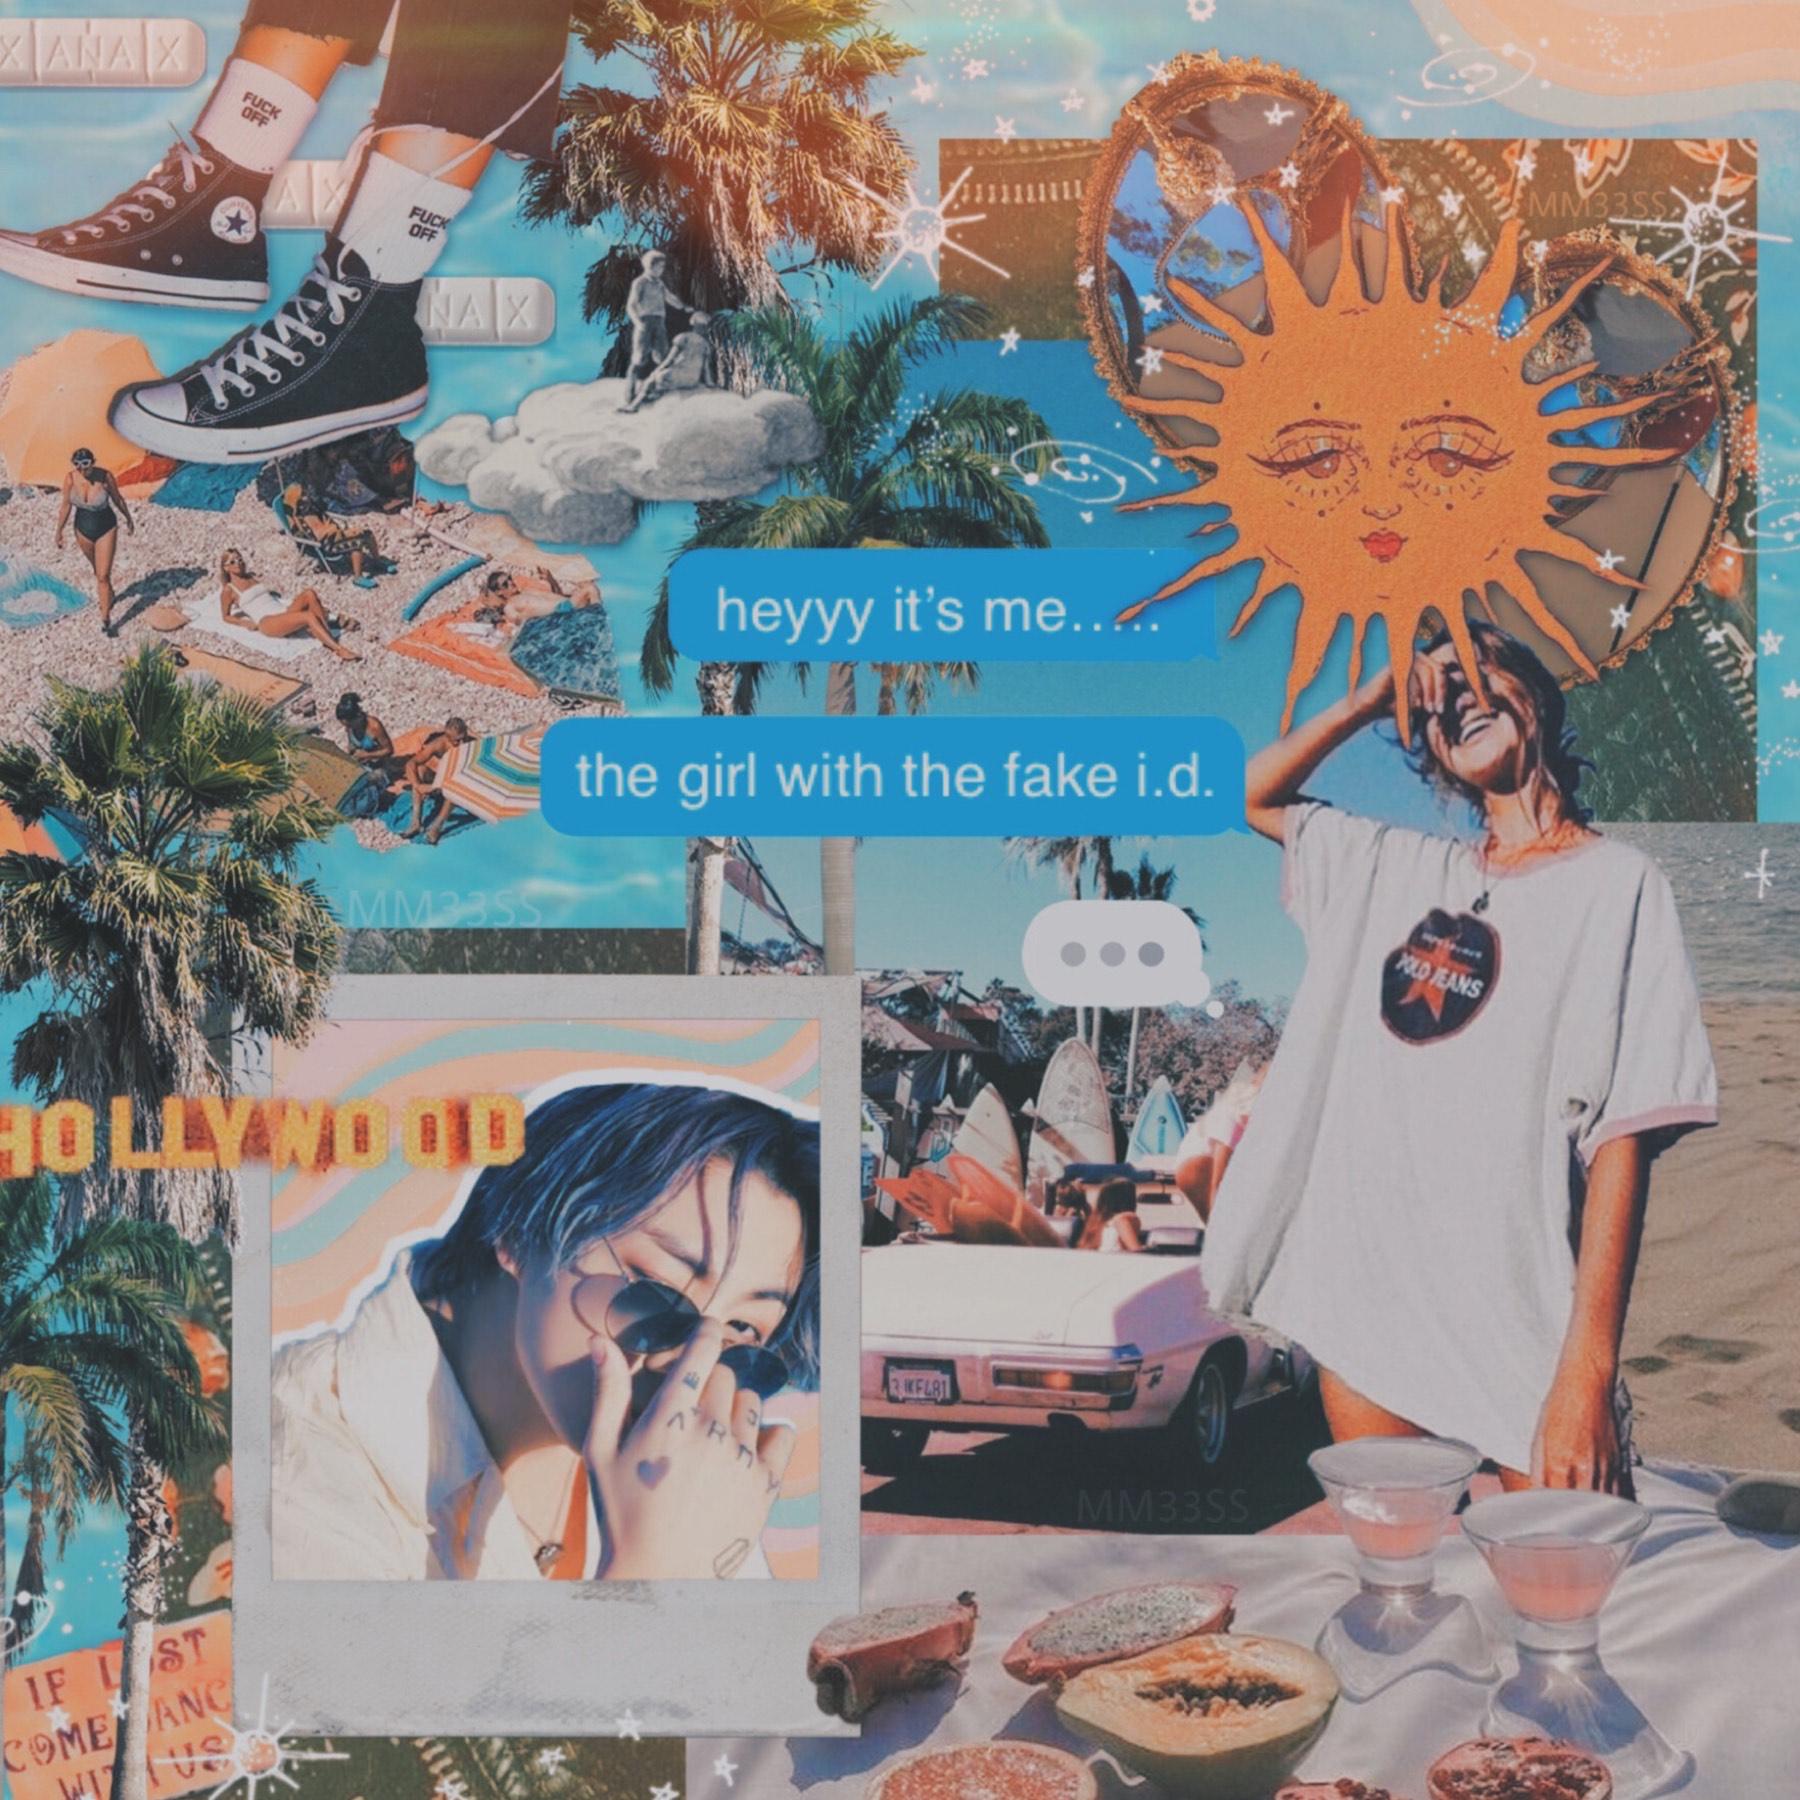 lava lamps / maty noyes feat beekwilder / Apr. 28, 2022 

created for contest held by lemonwater-

the theme was beach, but i went hippy summer w it 🤷‍♀️

image: jeon jungkook